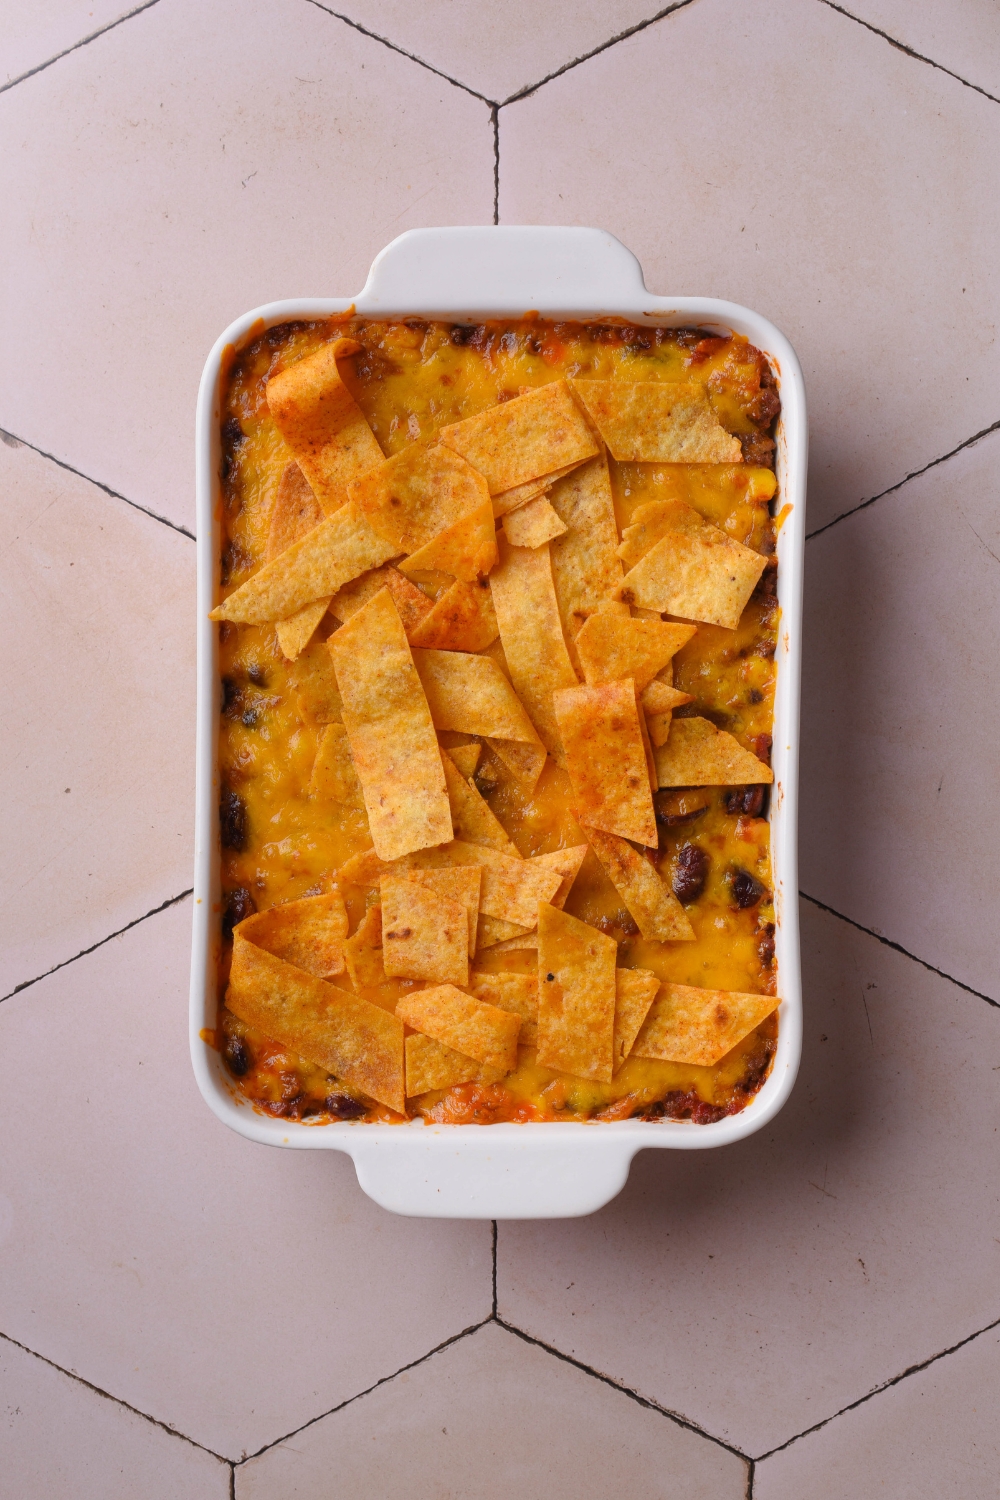 A baking dish filled with freshly baked casserole covered in melted cheese and topped with corn chips.